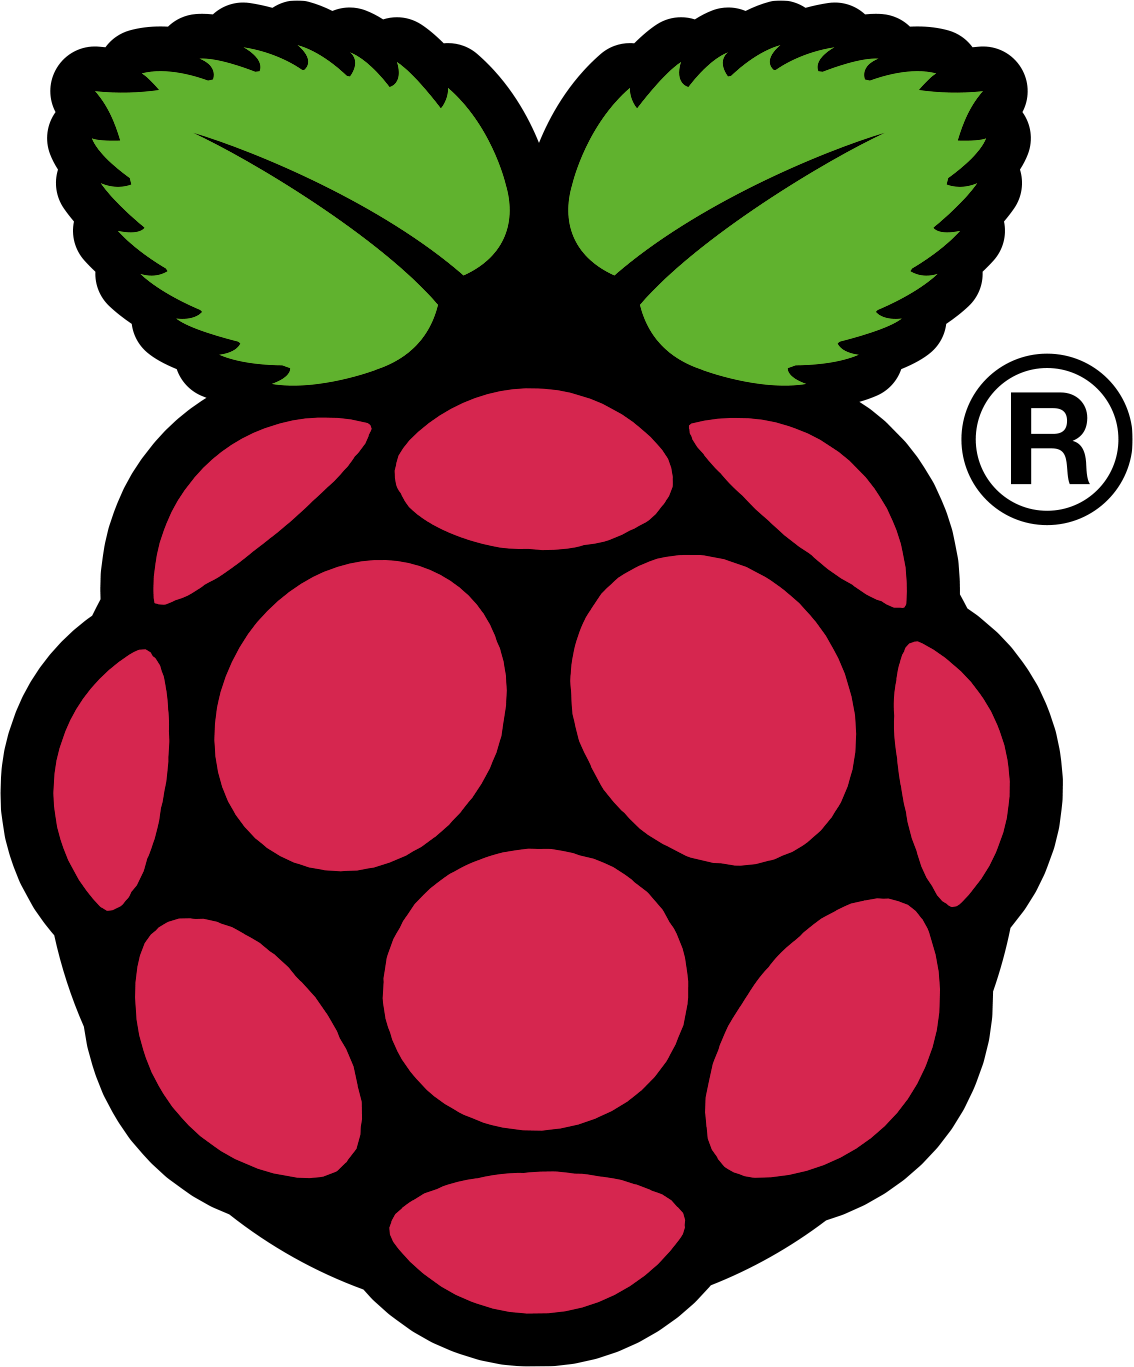 The Raspberry Pi 2 has arrived